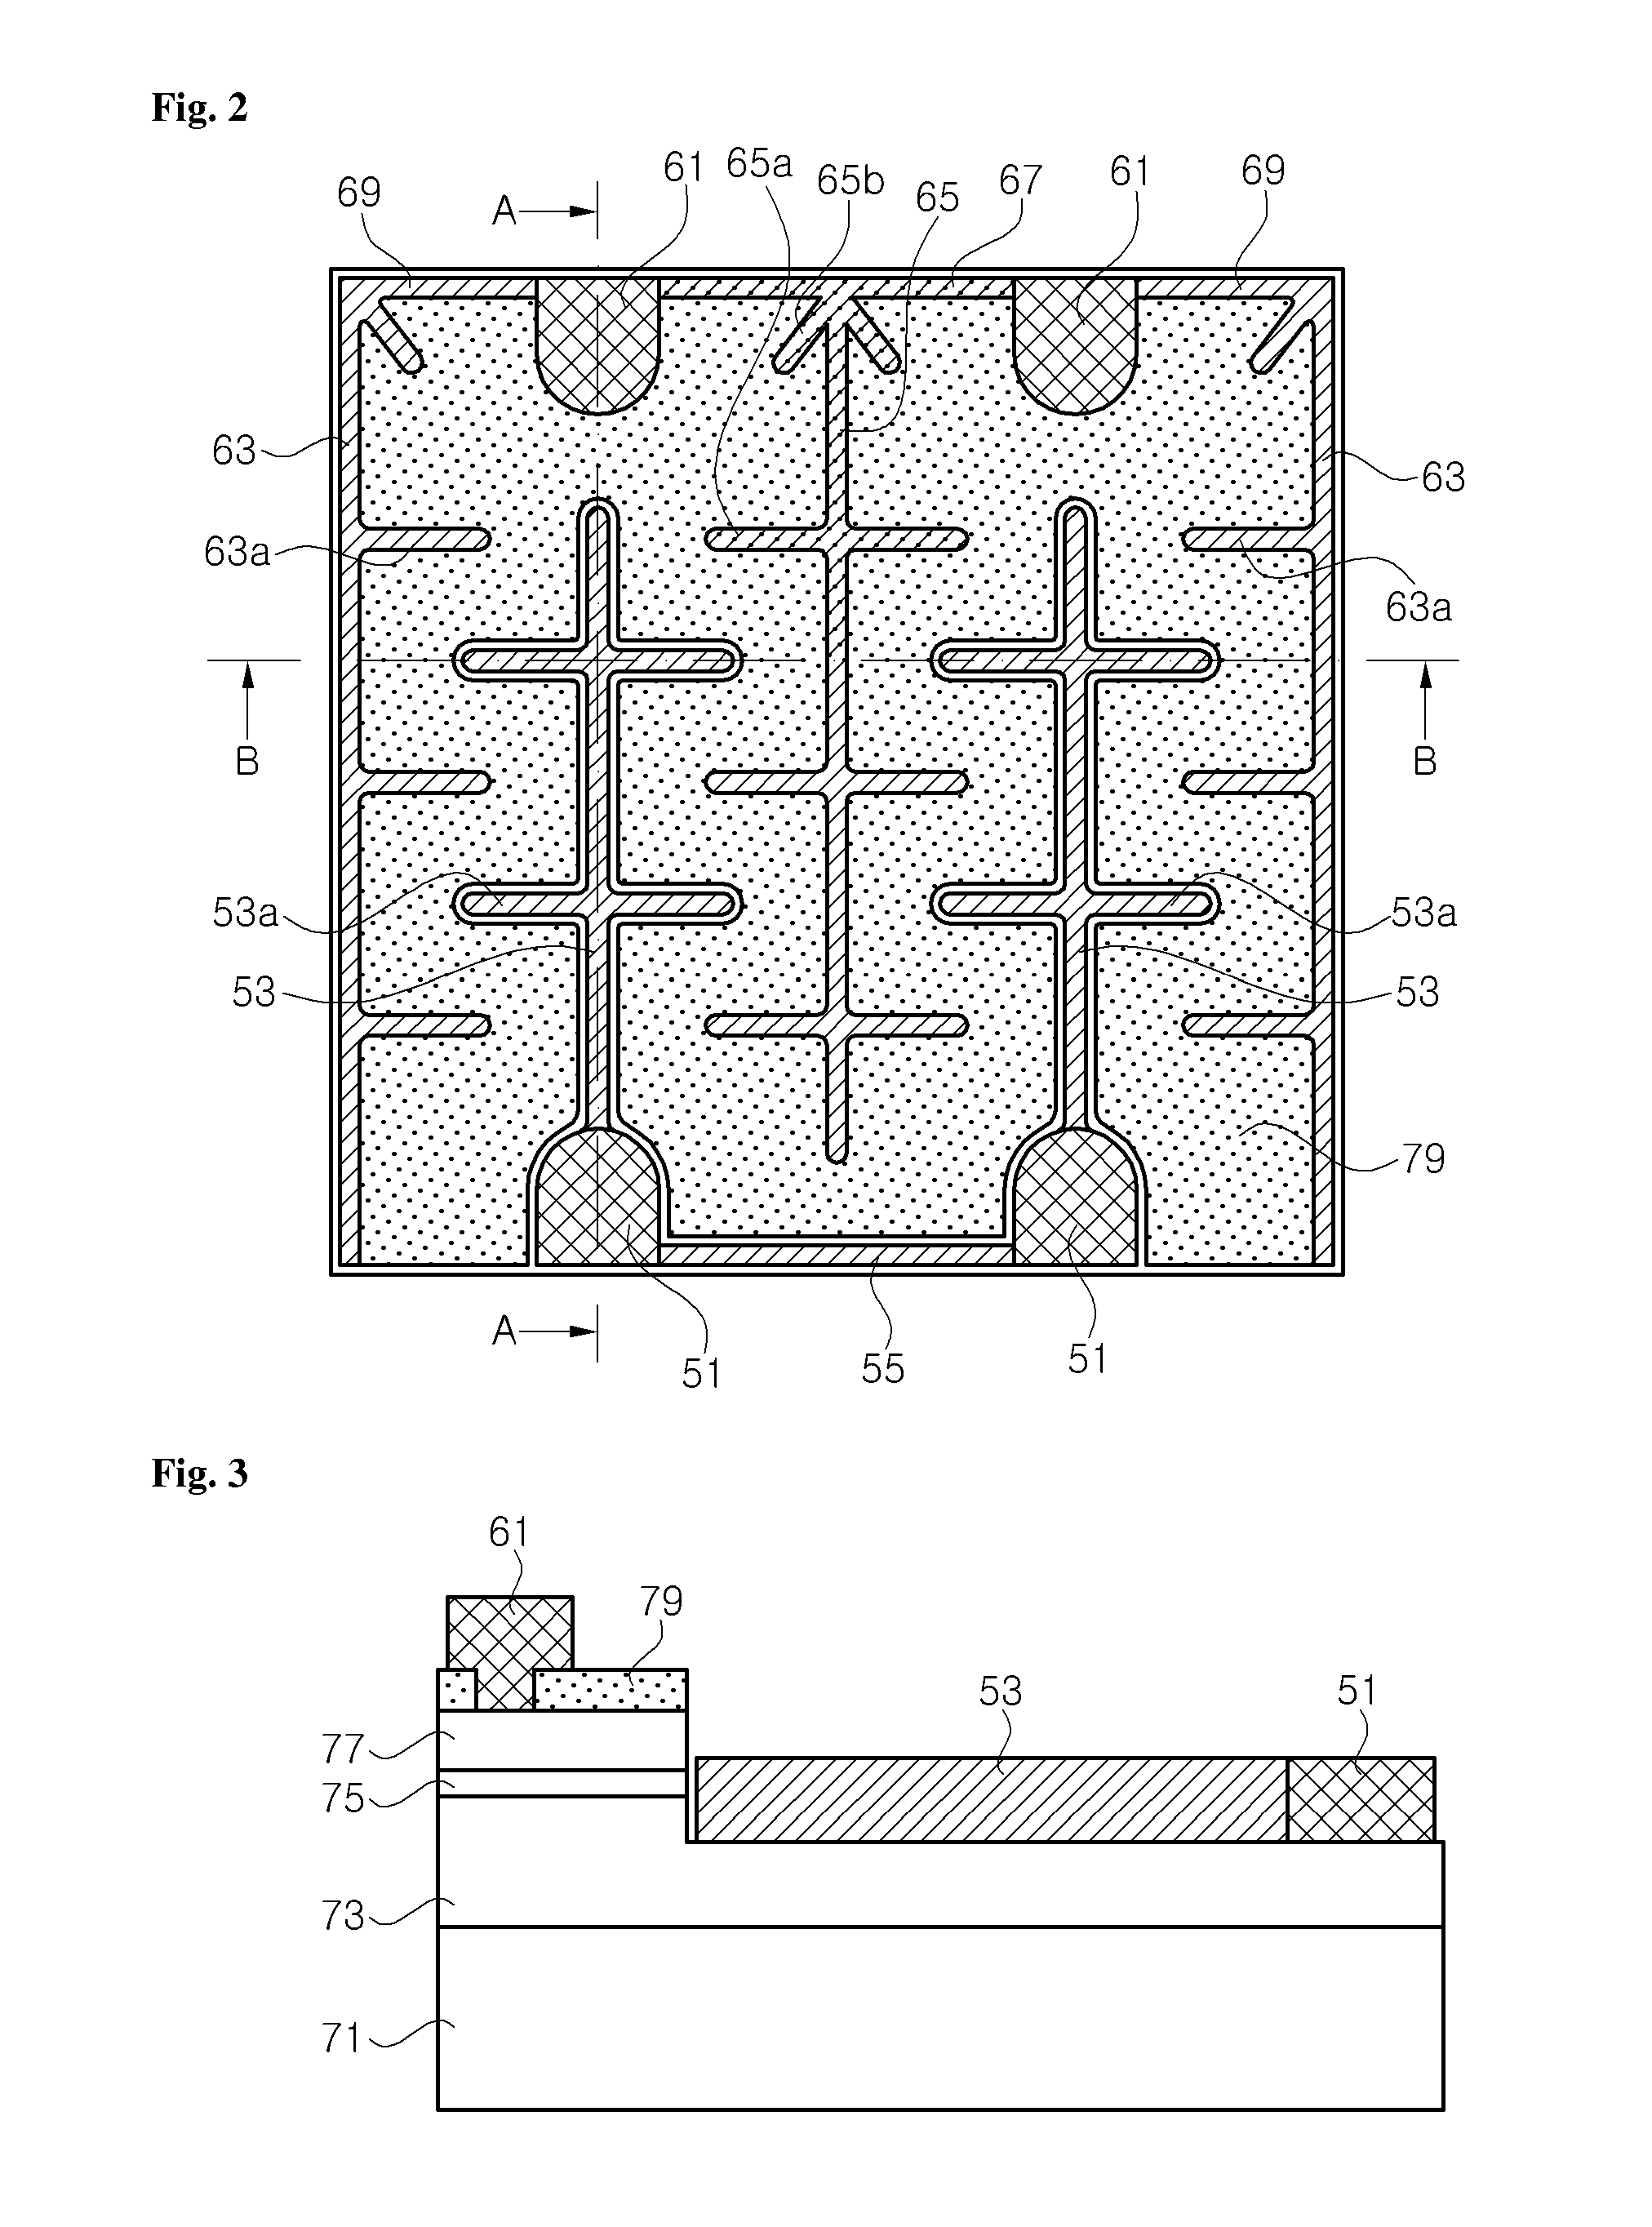 Light emitting diode having electrode extensions for current spreading